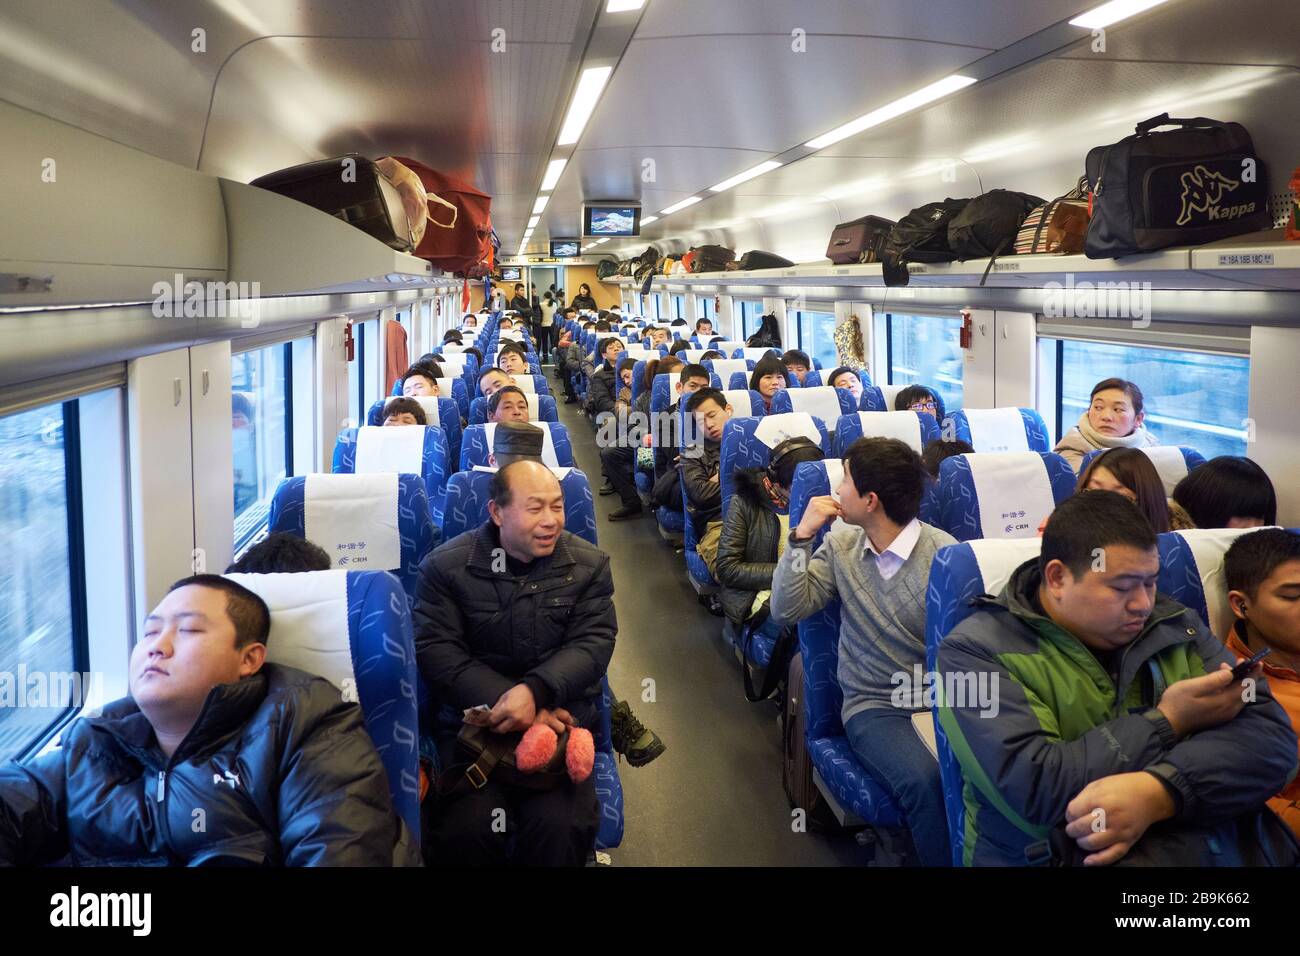 The interior of a full carriage on the Chinese high speed railway system. Stock Photo